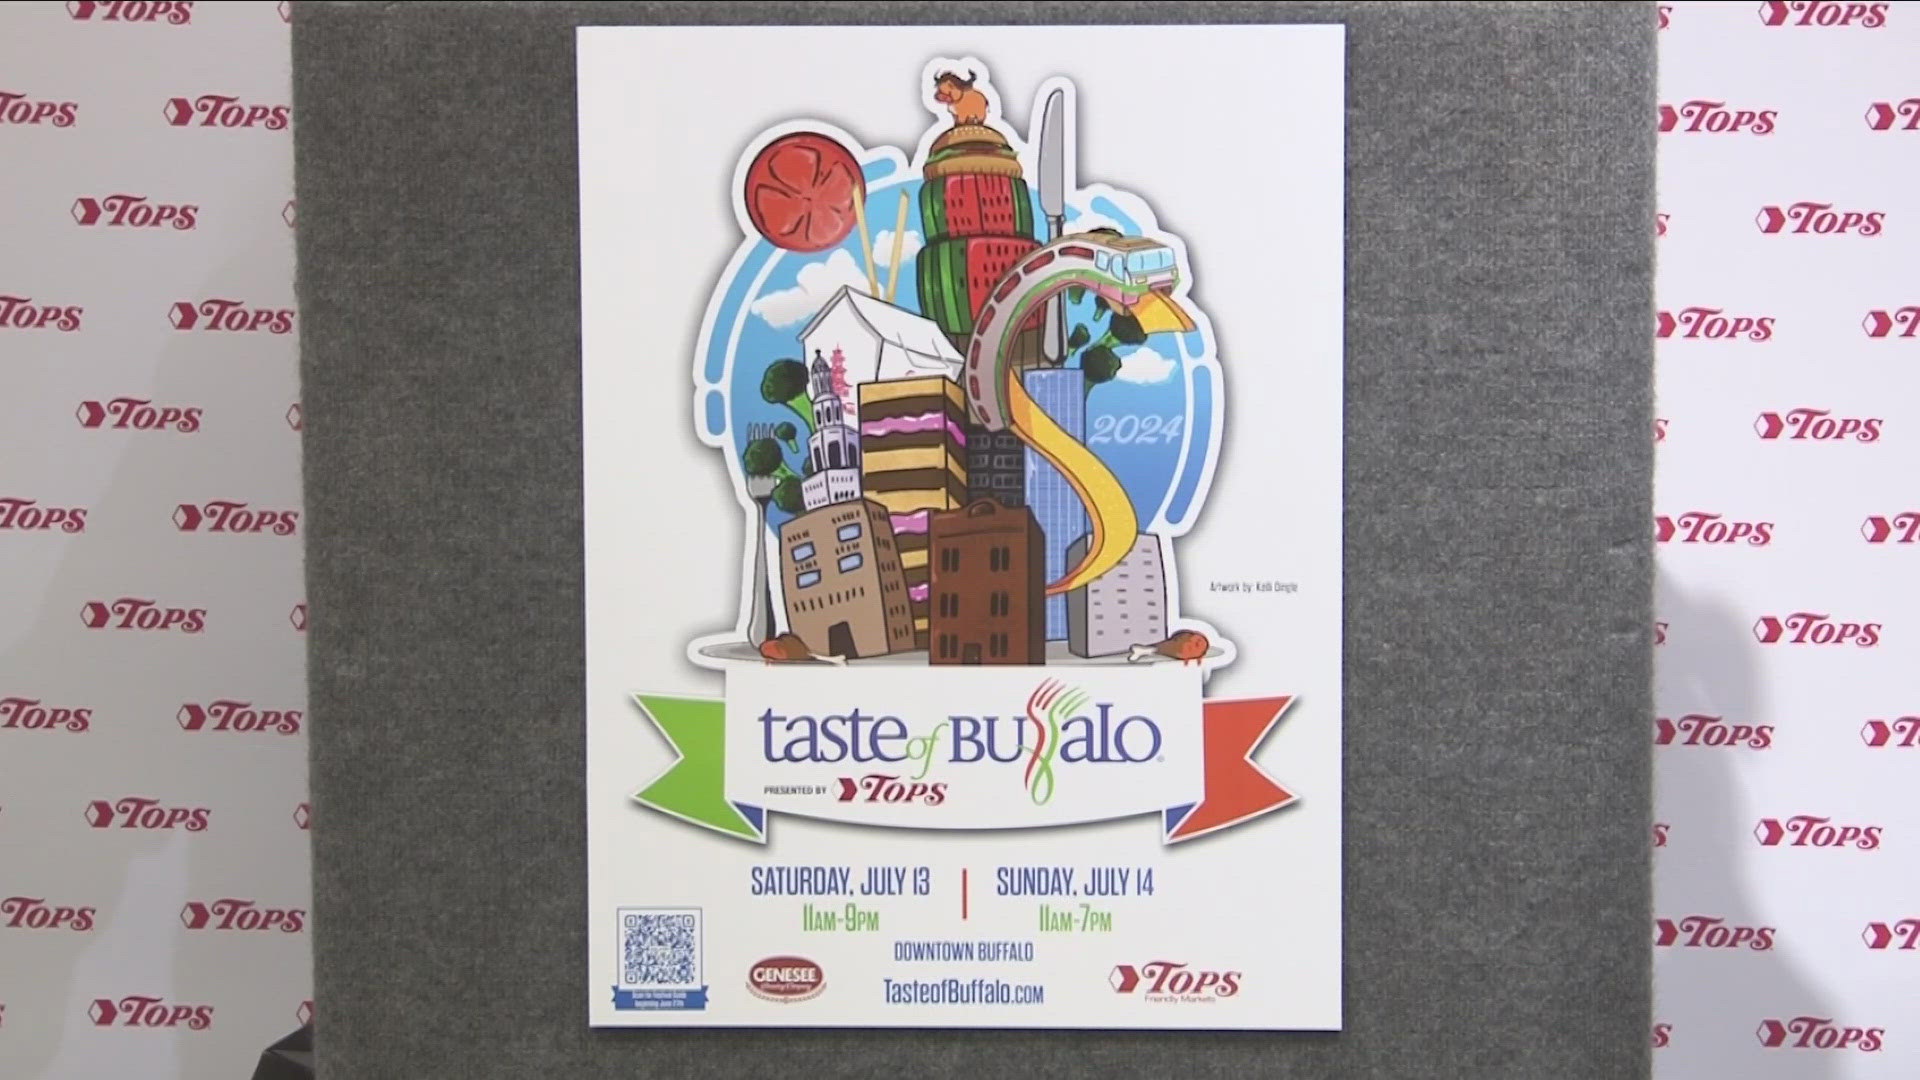 The popular 2-day food festival makes its return to downtown Buffalo this July.